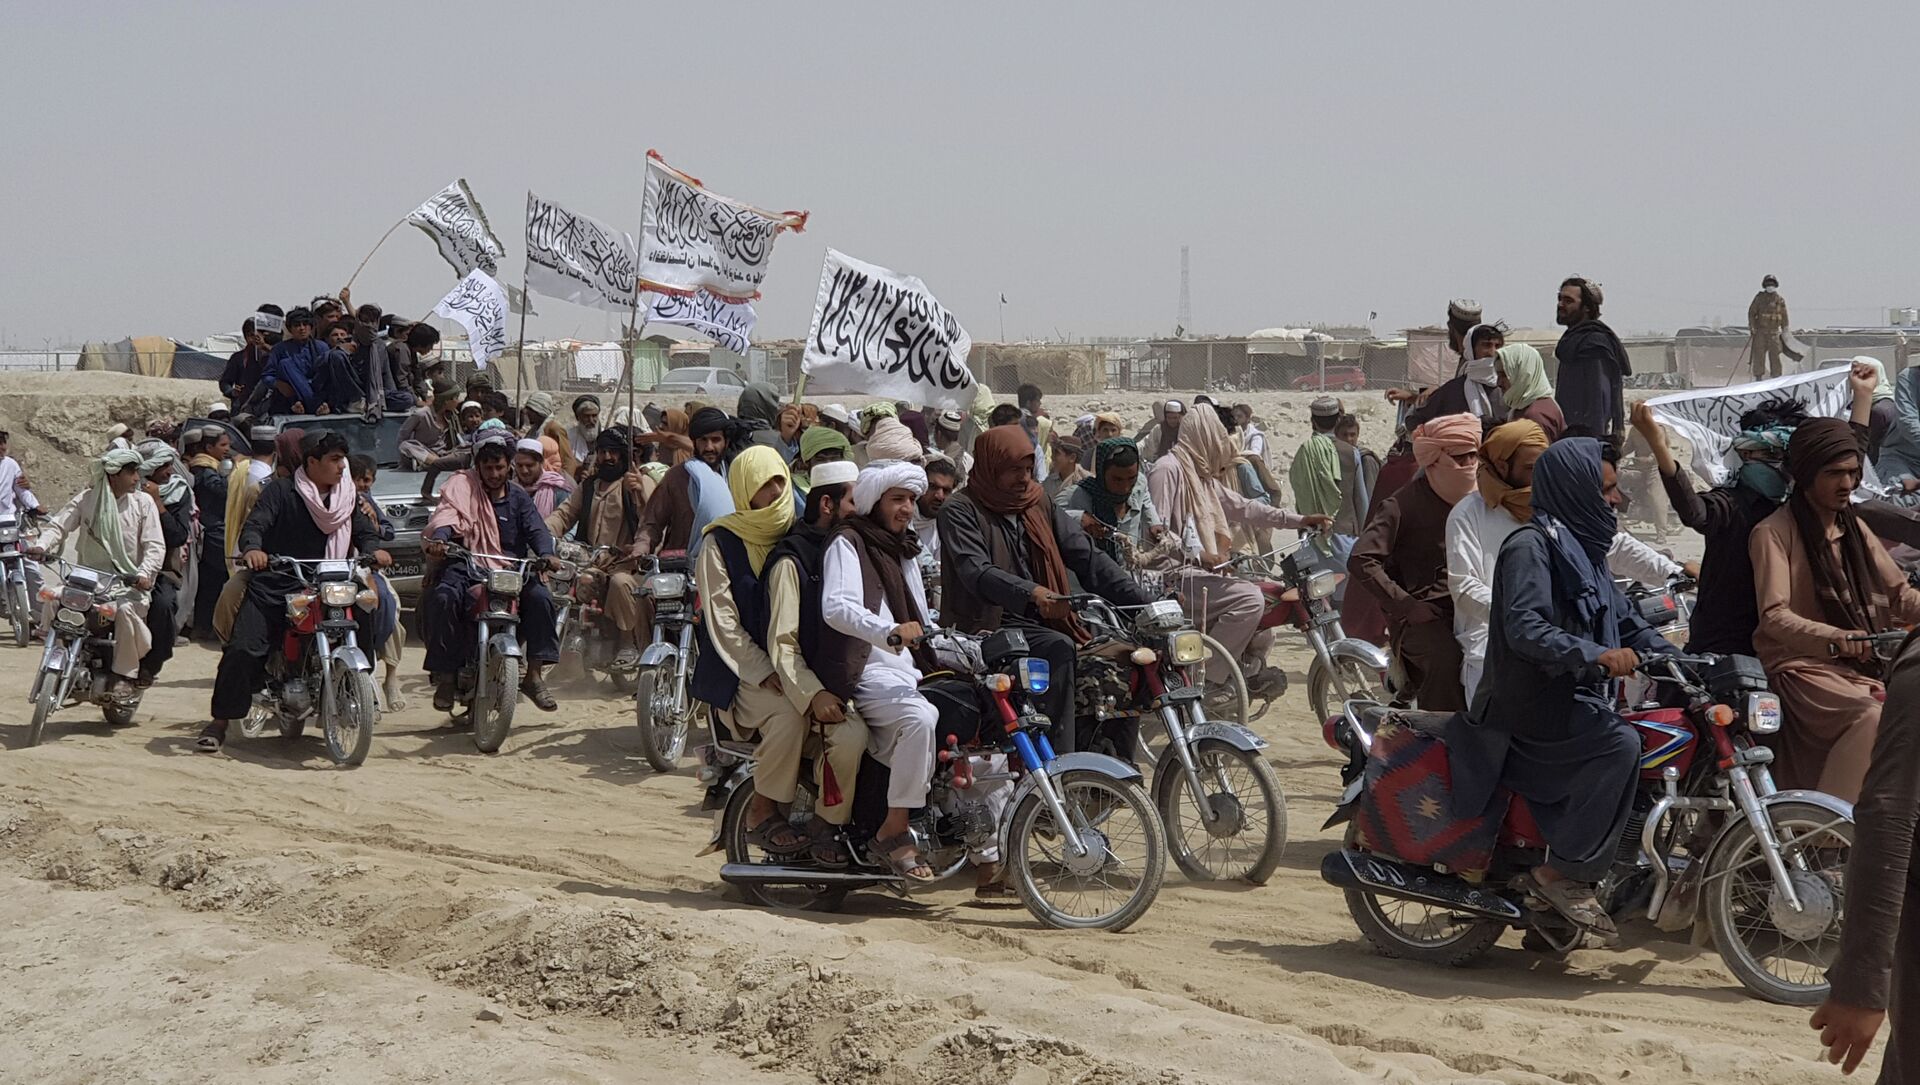 Supporters of the Taliban carry the Taliban's signature white flags in the Afghan-Pakistan border town of Chaman, Pakistan, Wednesday, July 14, 2021 - Sputnik International, 1920, 01.08.2021